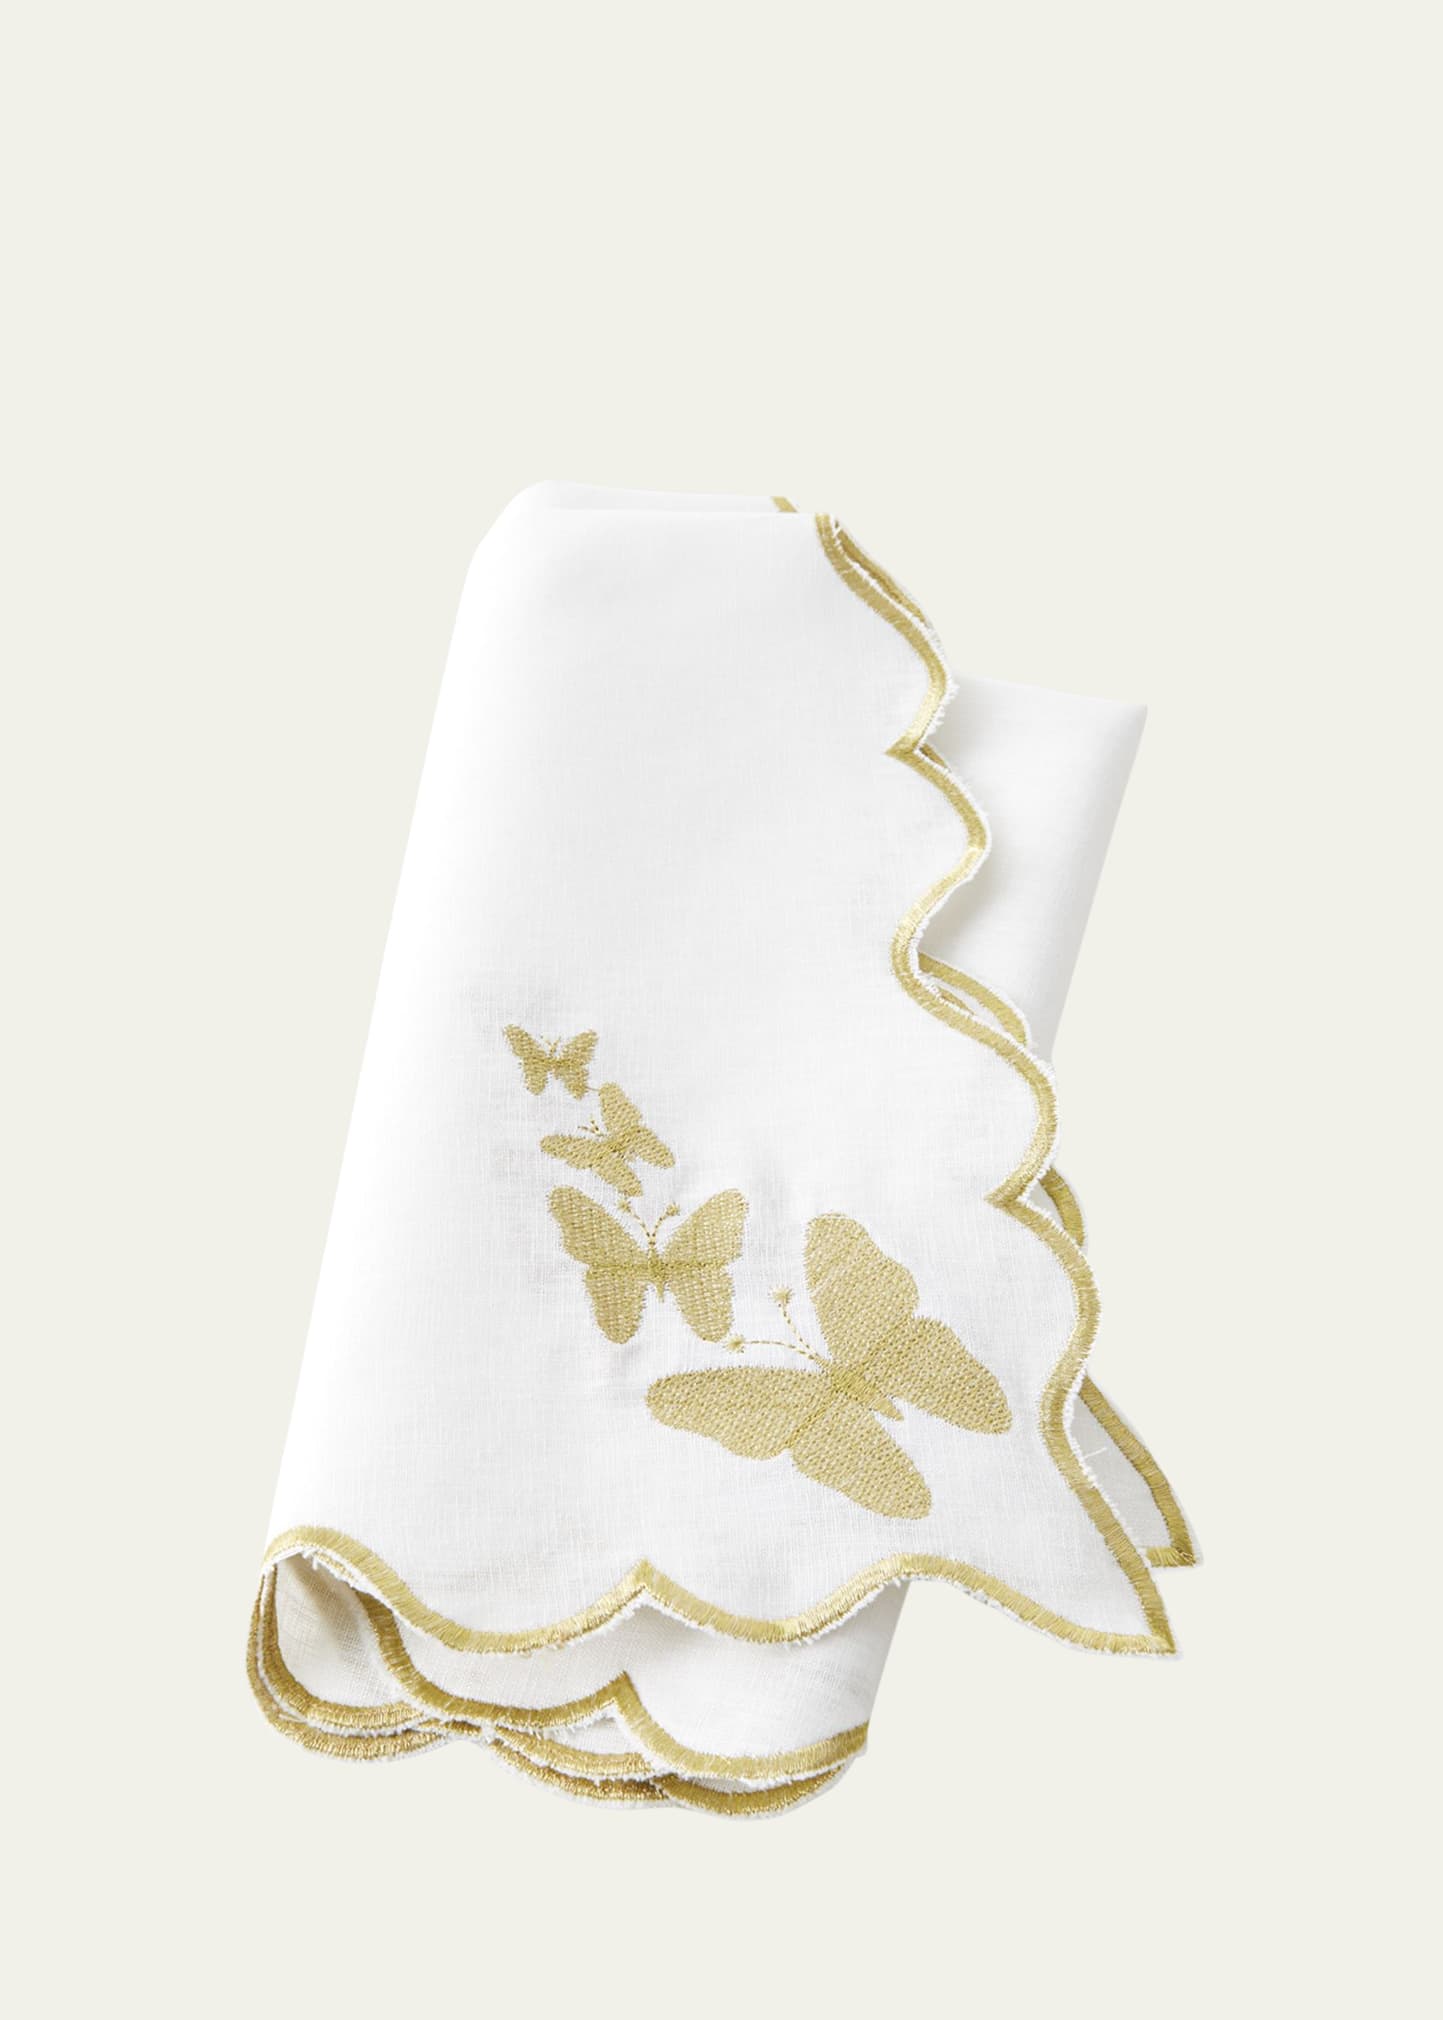 White Linen Butterfly Gold Embroidery Napkin, 24"Sq.